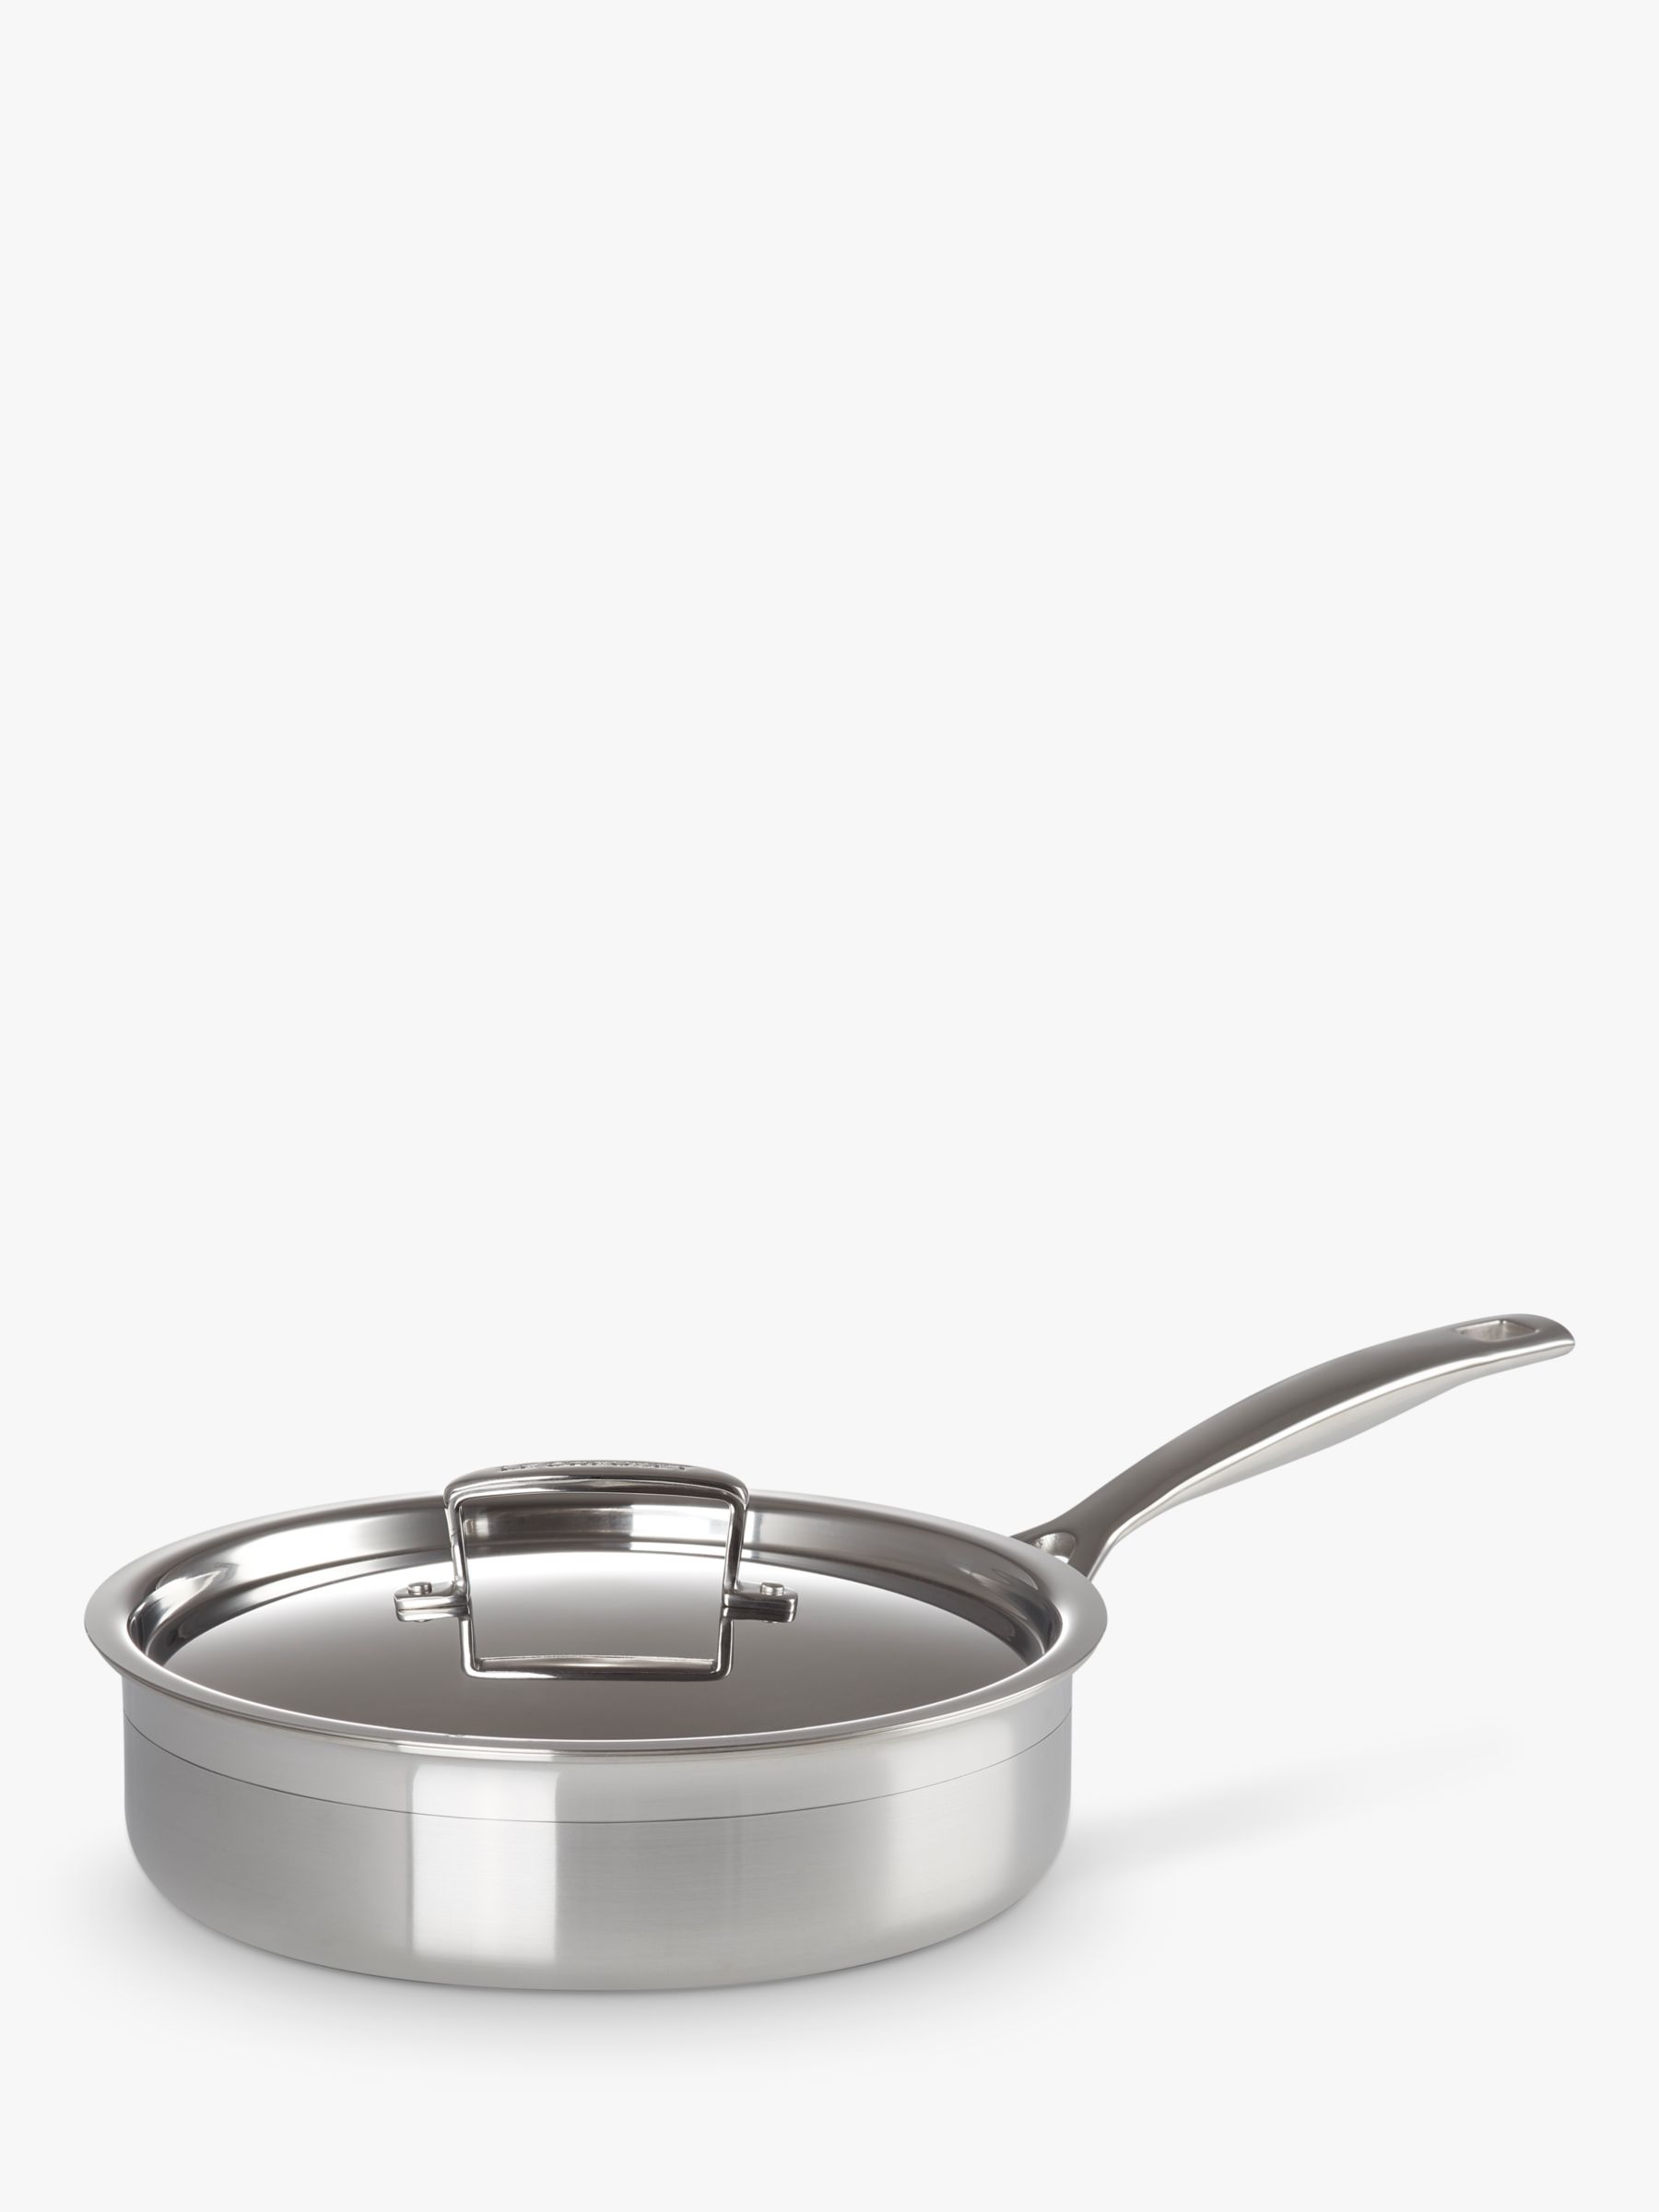 Le Creuset 3-Ply Stainless Steel 24cm Sauté Pan with Lid